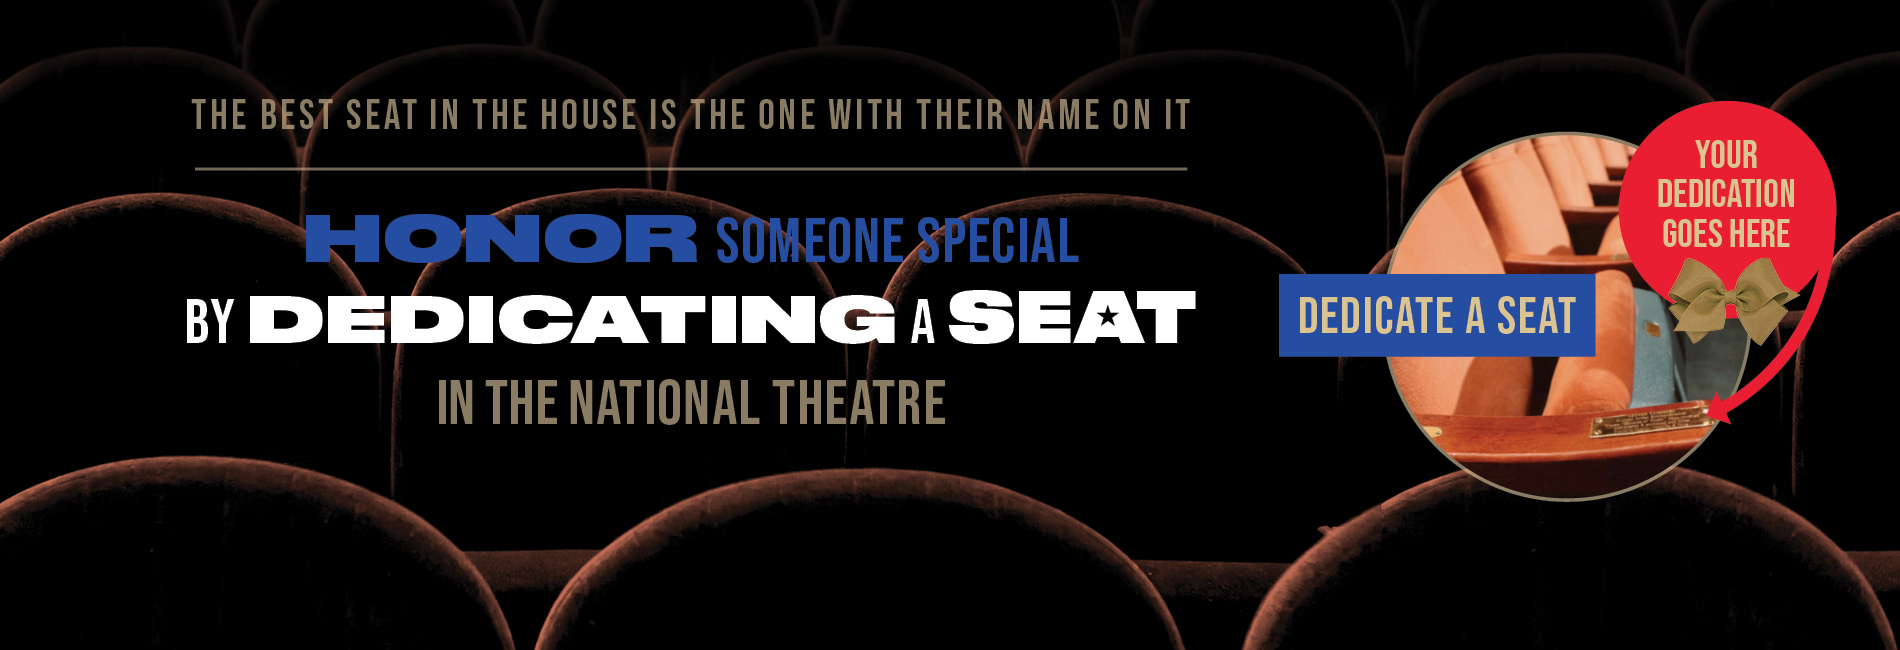 Slide 3: Dedicate a seat at The National